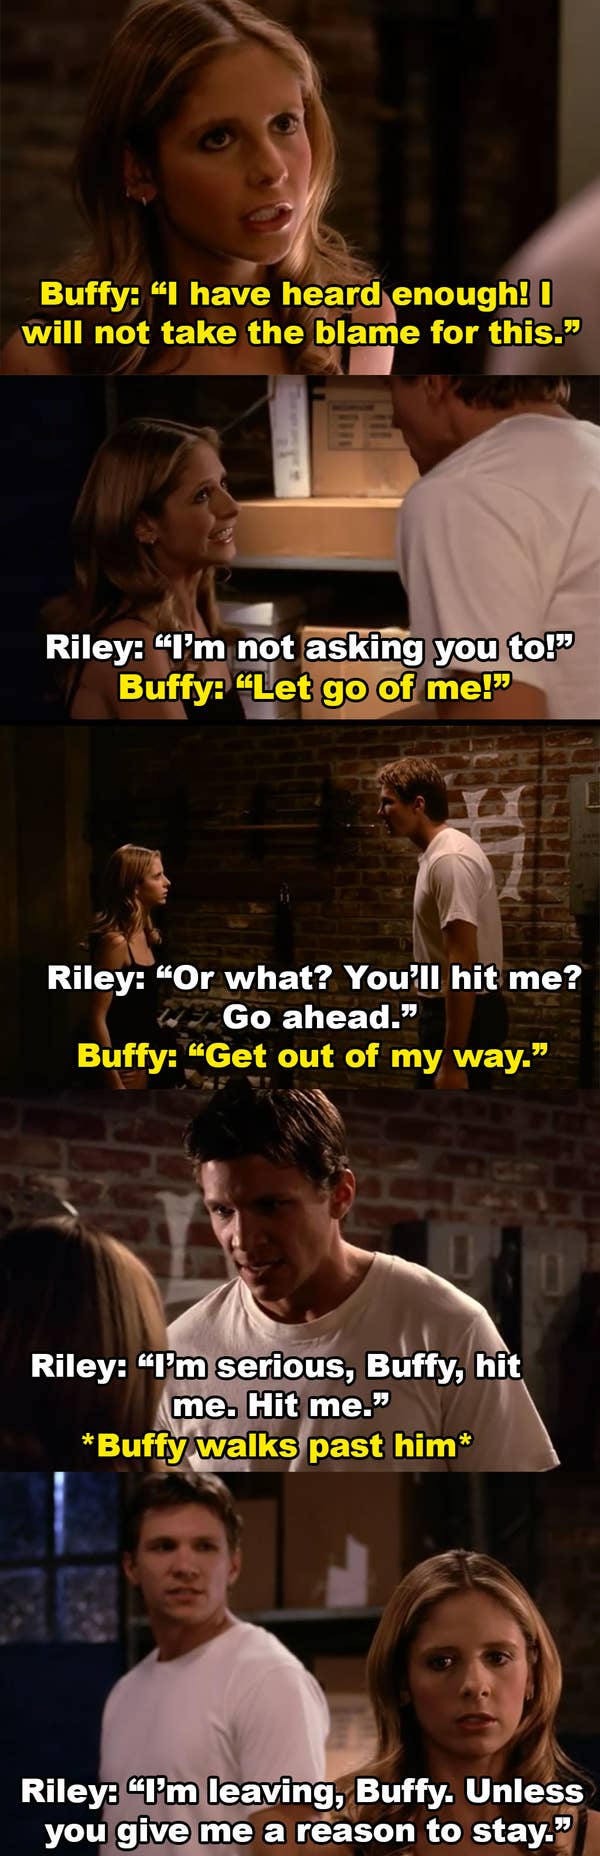 Buffy tries to leave and says she won't take the blame for this. Riley grabs her and then asks her to hit him when she tries to get him to stop. She walks away and Riley tells her he's leaving unless she gives him a reason to stay